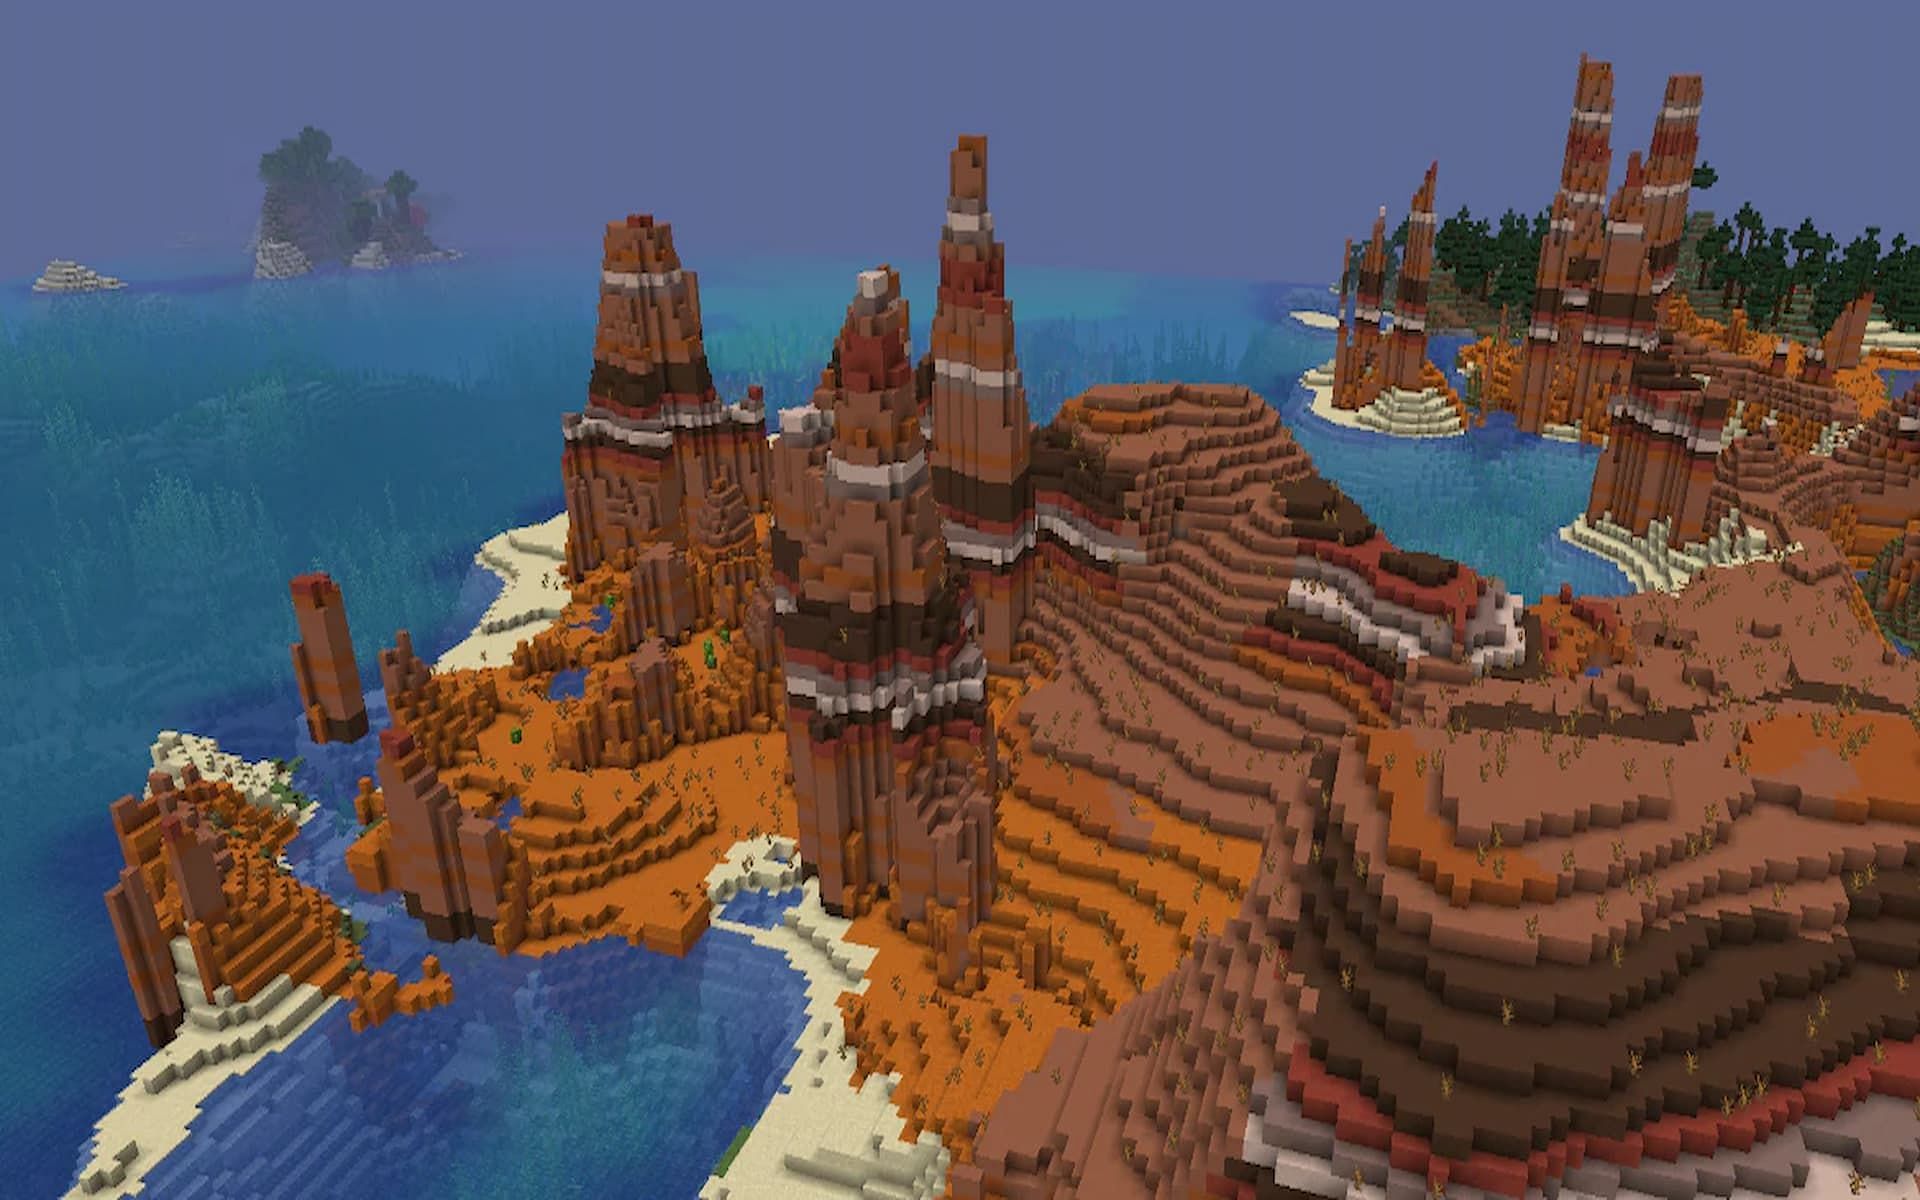 Players can find lots of wealth in the badlands (Image via Minecraft.net)